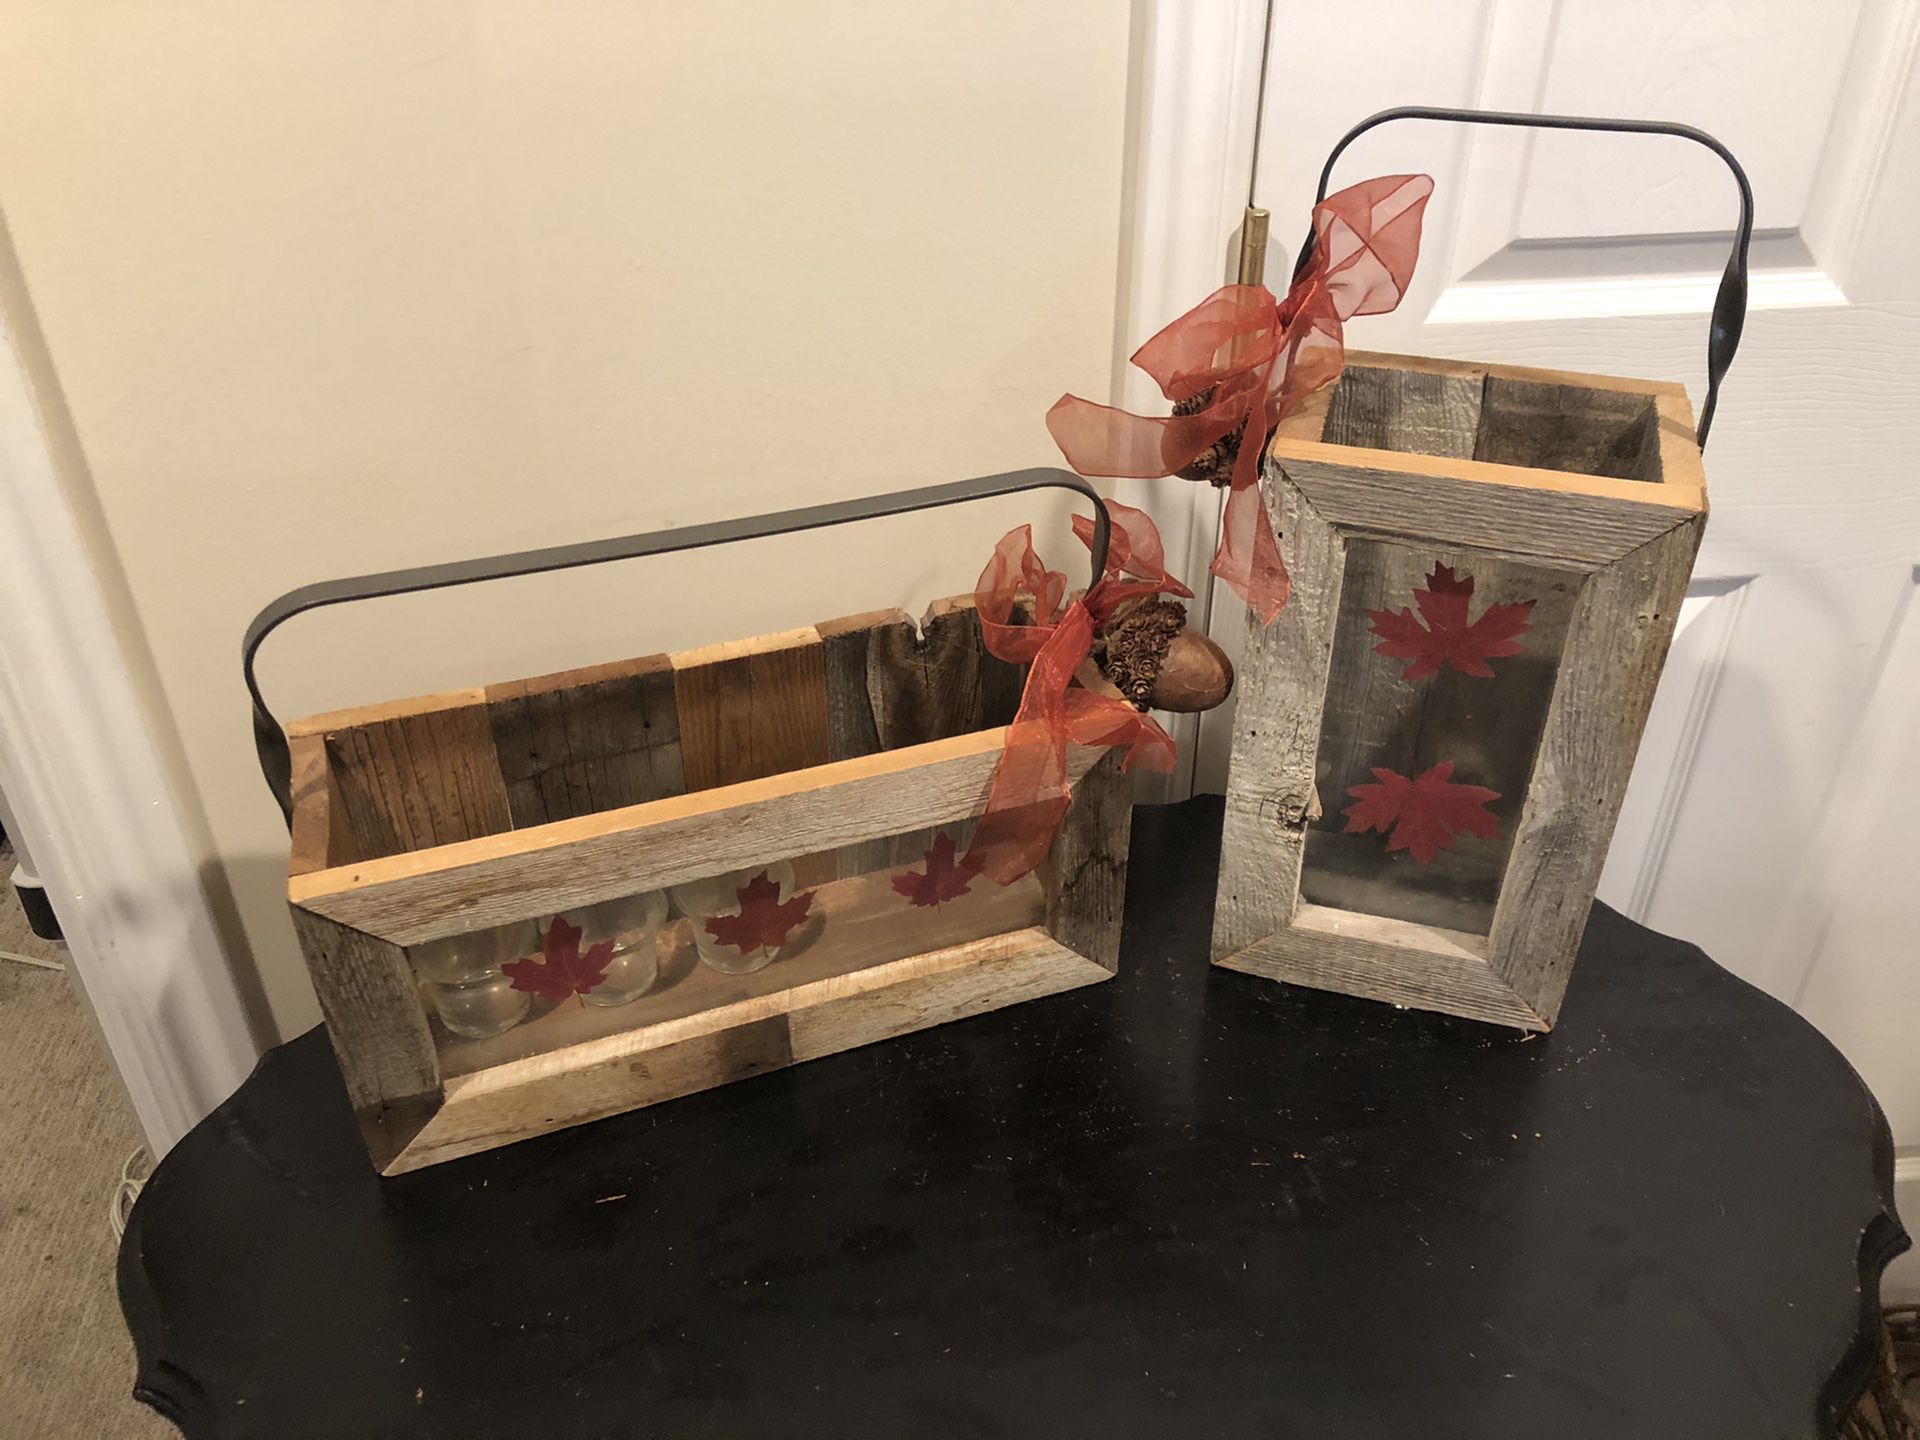 Awesome Set of 2 Barnwood & Glass Farmhouse Decor Boxes W/ Twisted Metal Handles!